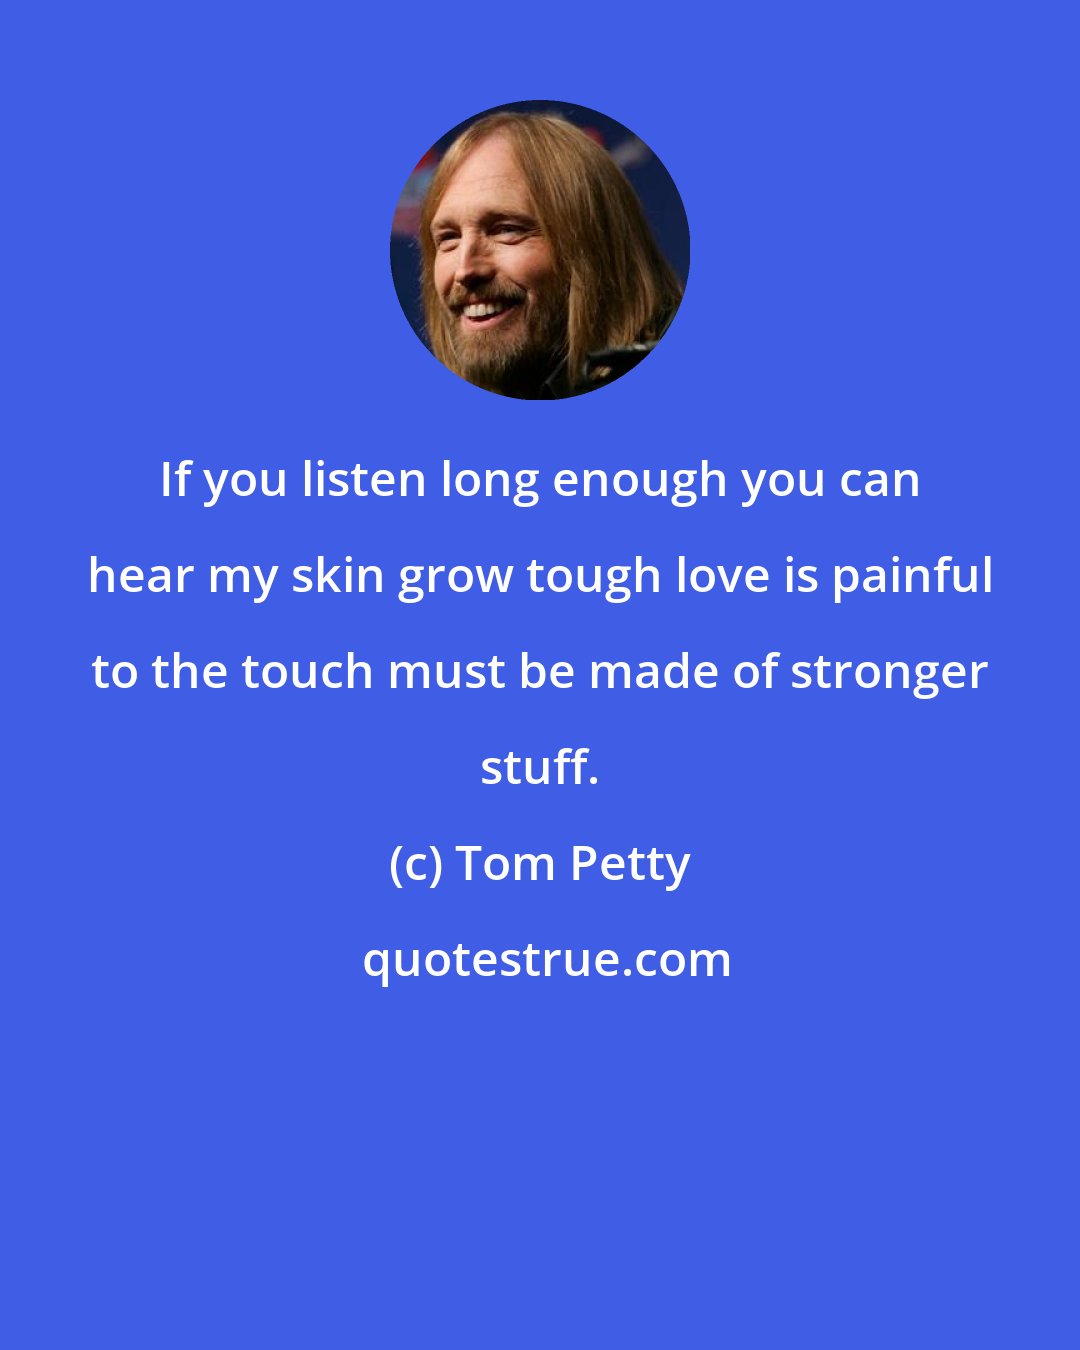 Tom Petty: If you listen long enough you can hear my skin grow tough love is painful to the touch must be made of stronger stuff.